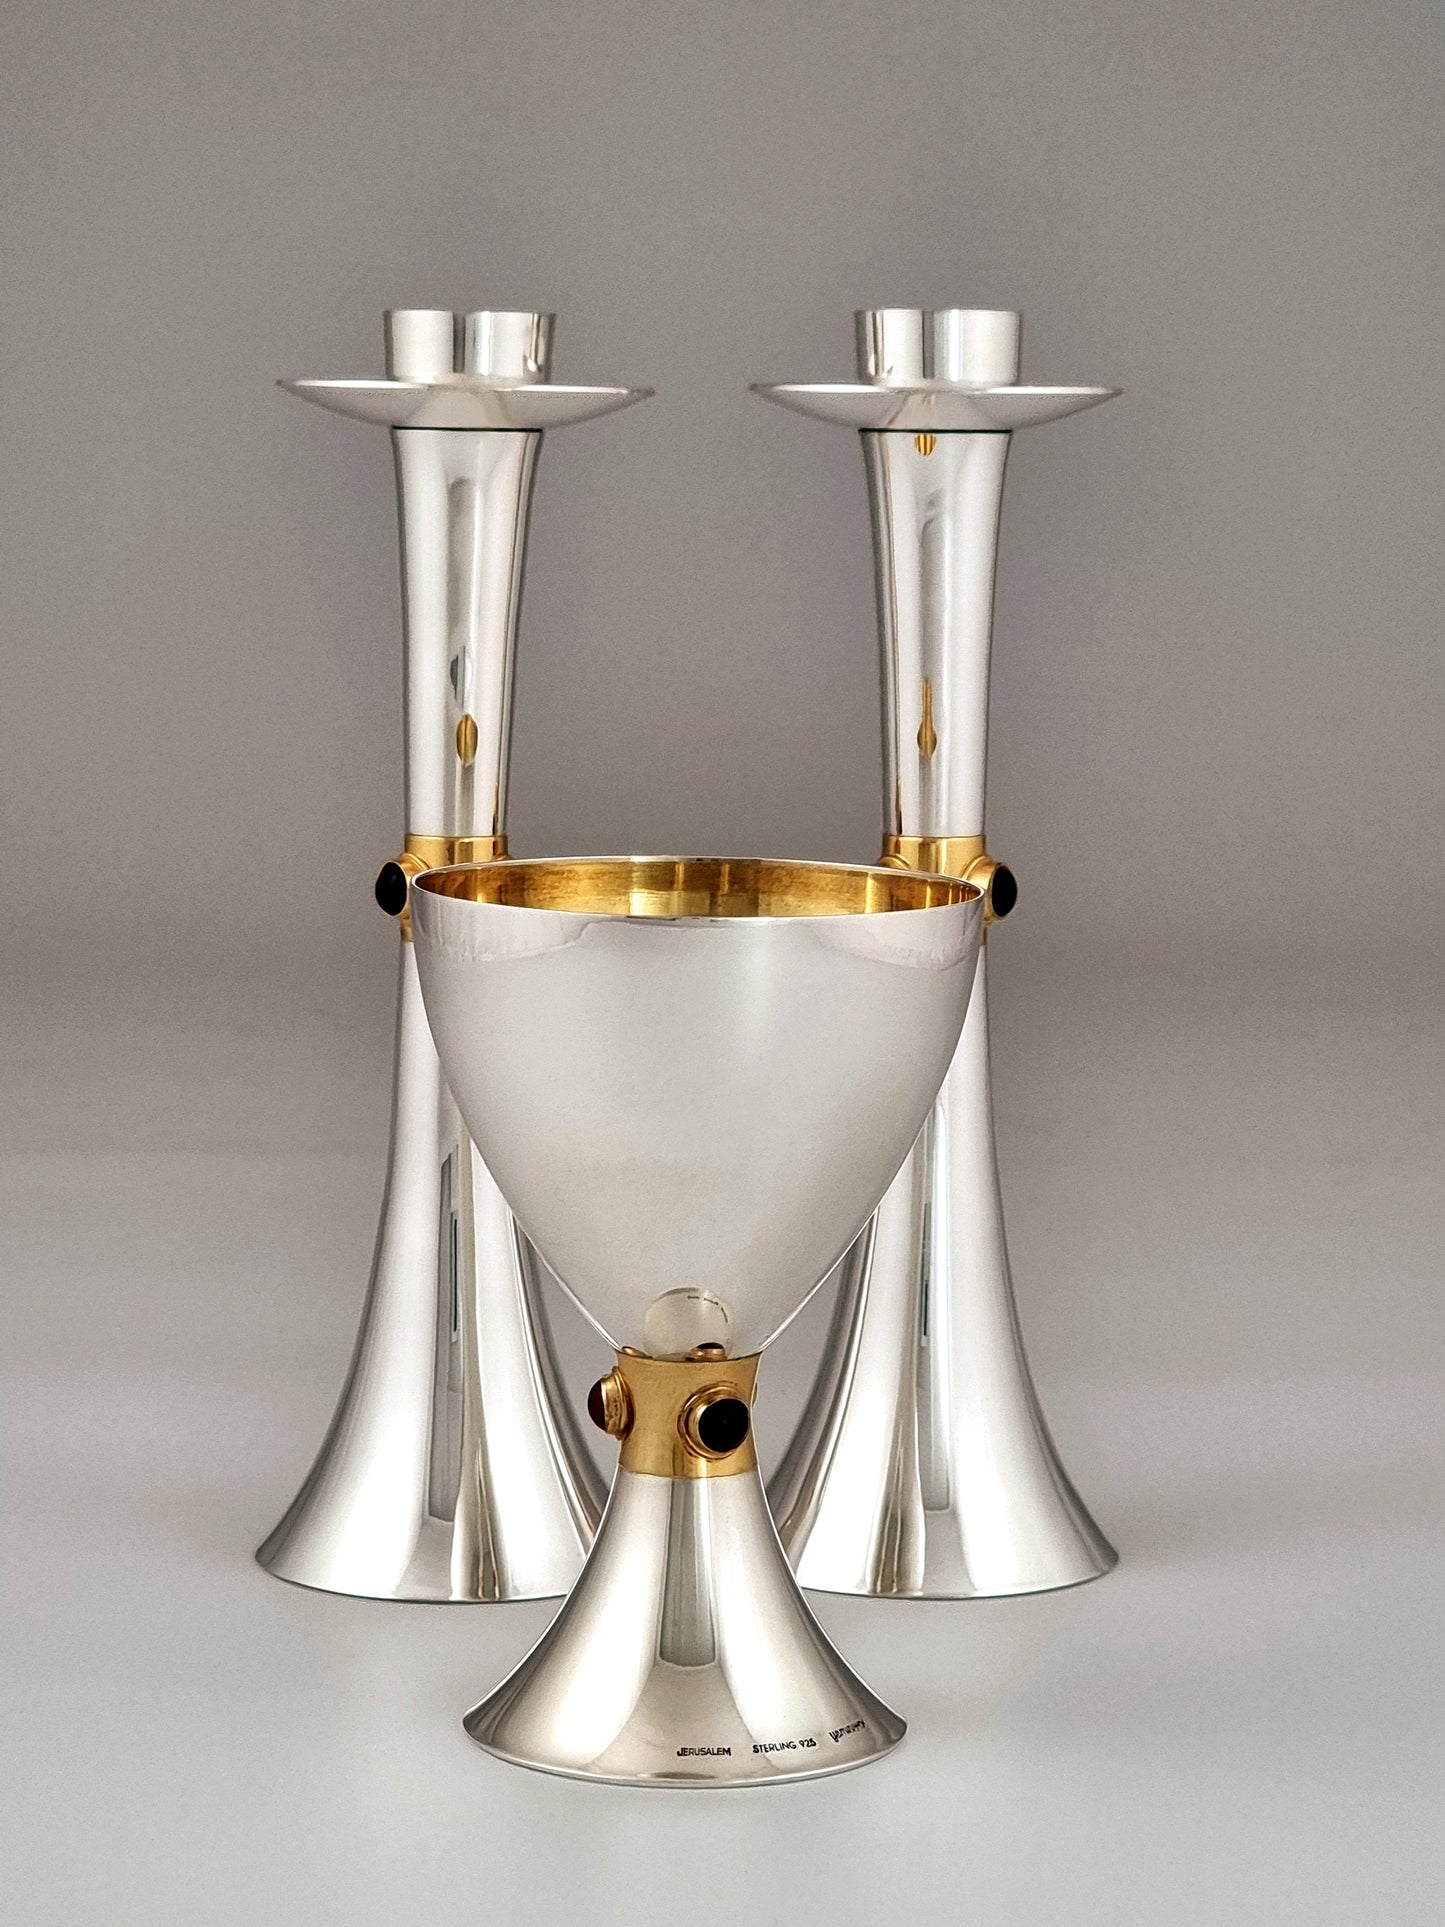 A perfect match of candlesticks and Kiddush cup in The Deborah set